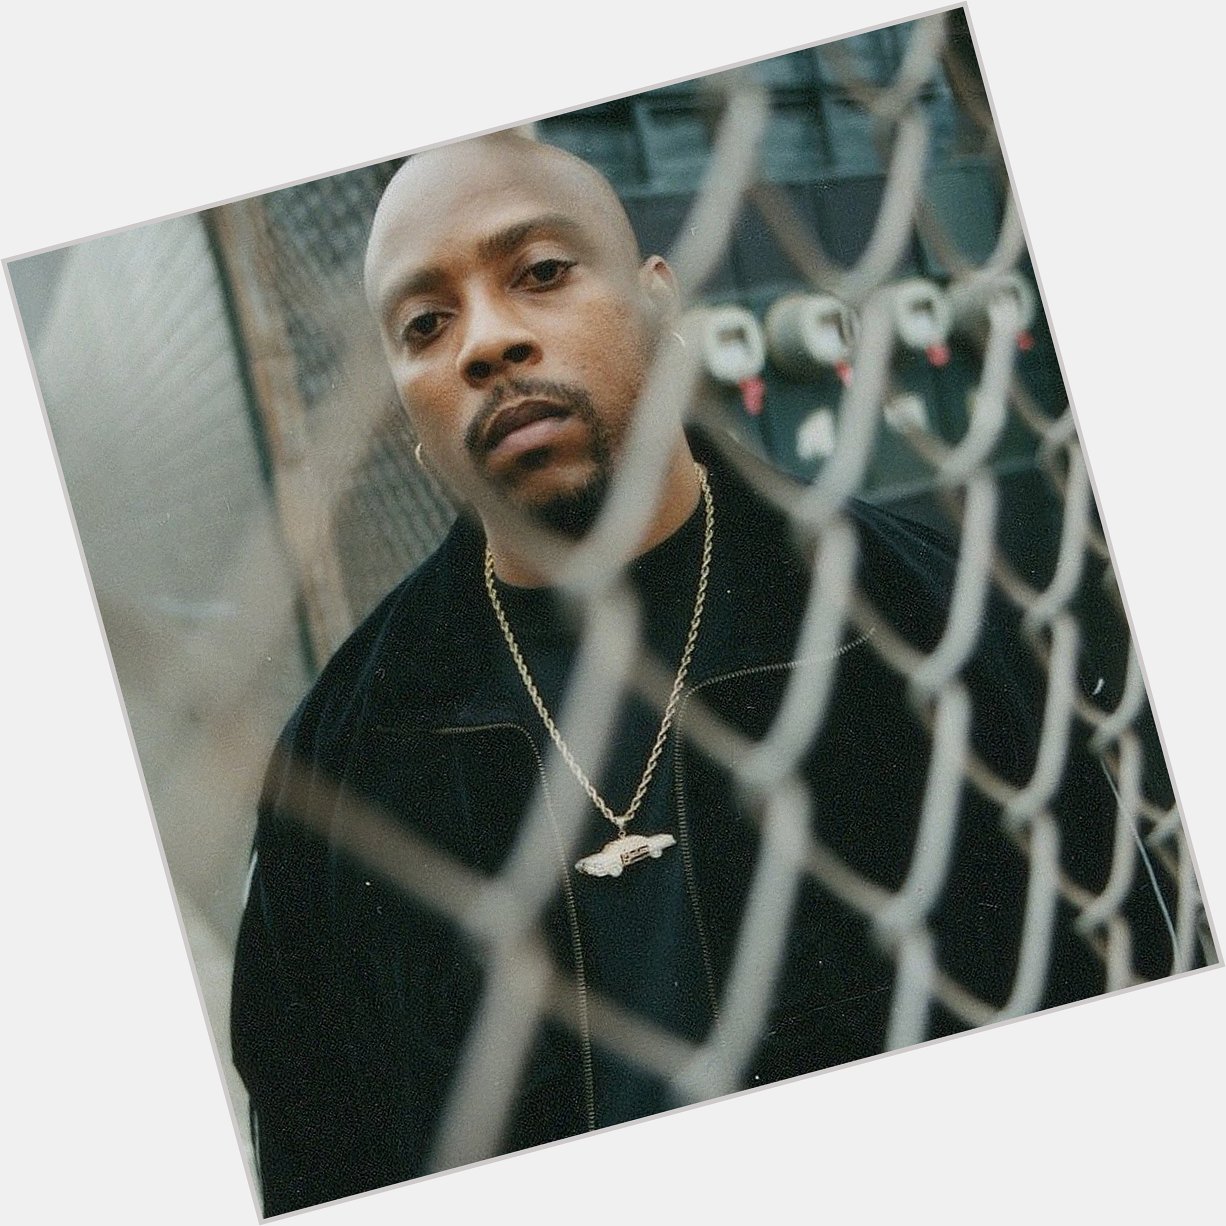 Happy Birthday to Nate Dogg. Rest in Peace  